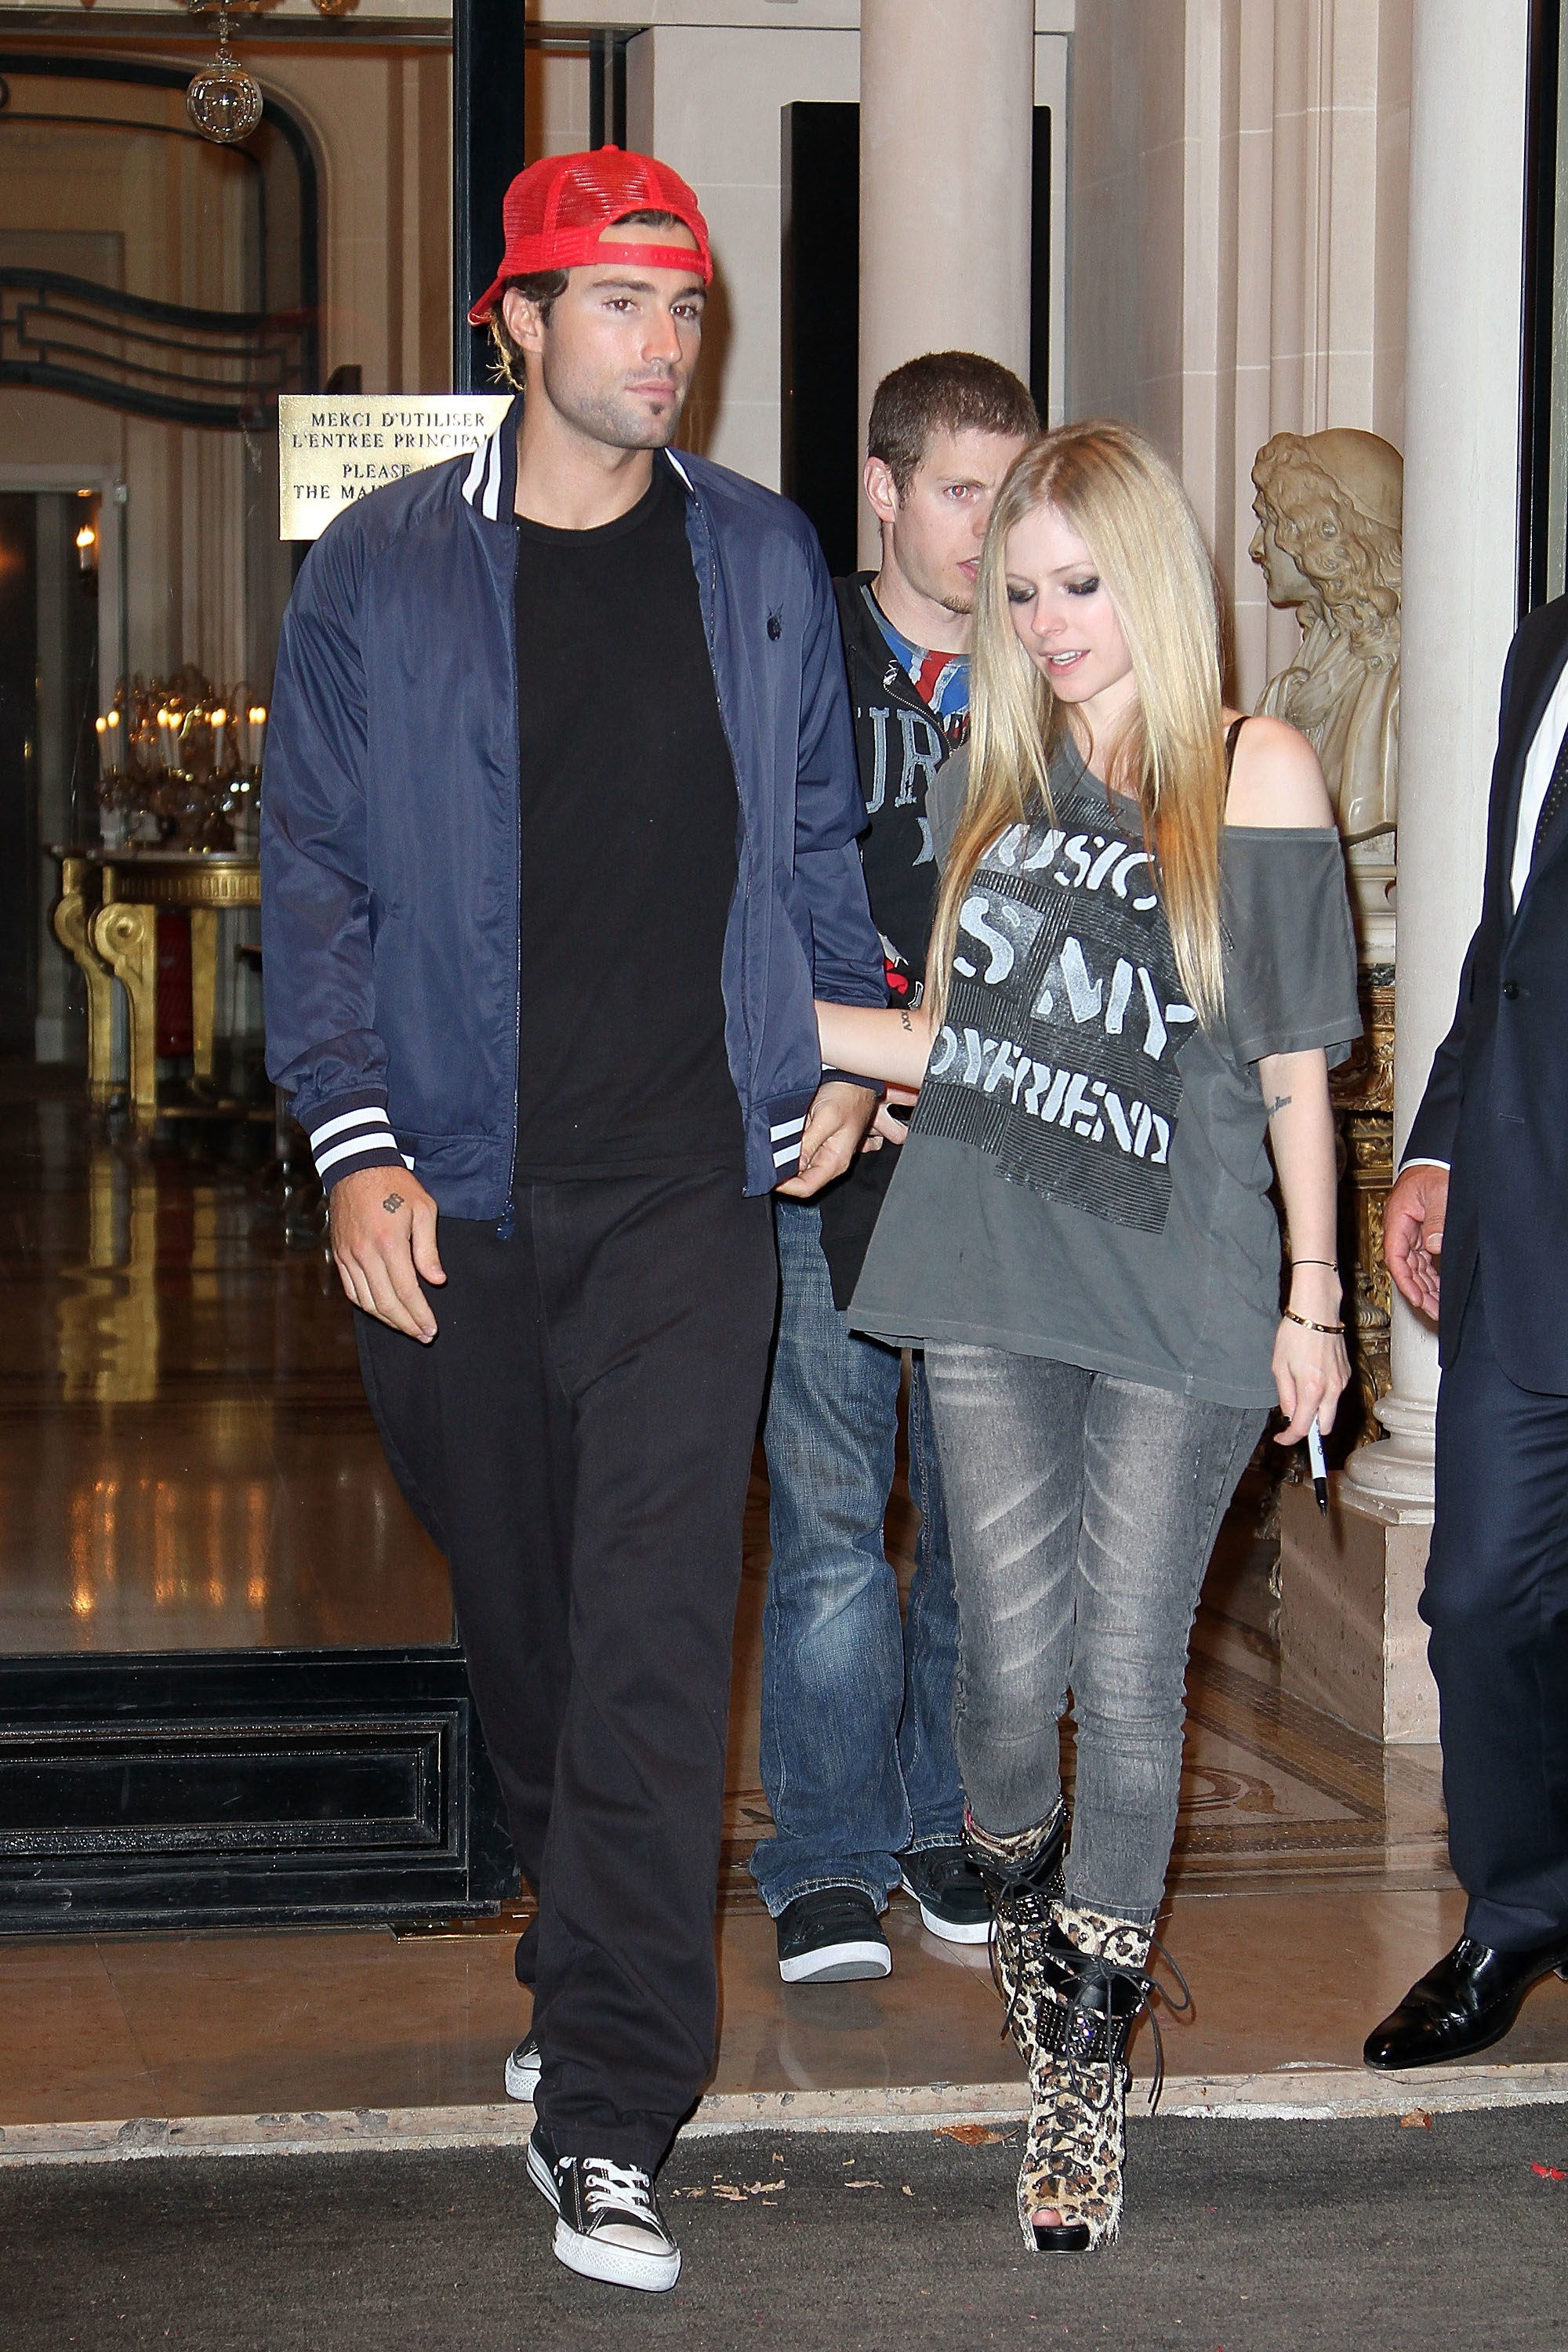 Avril walking out of a building with Brody Jenner